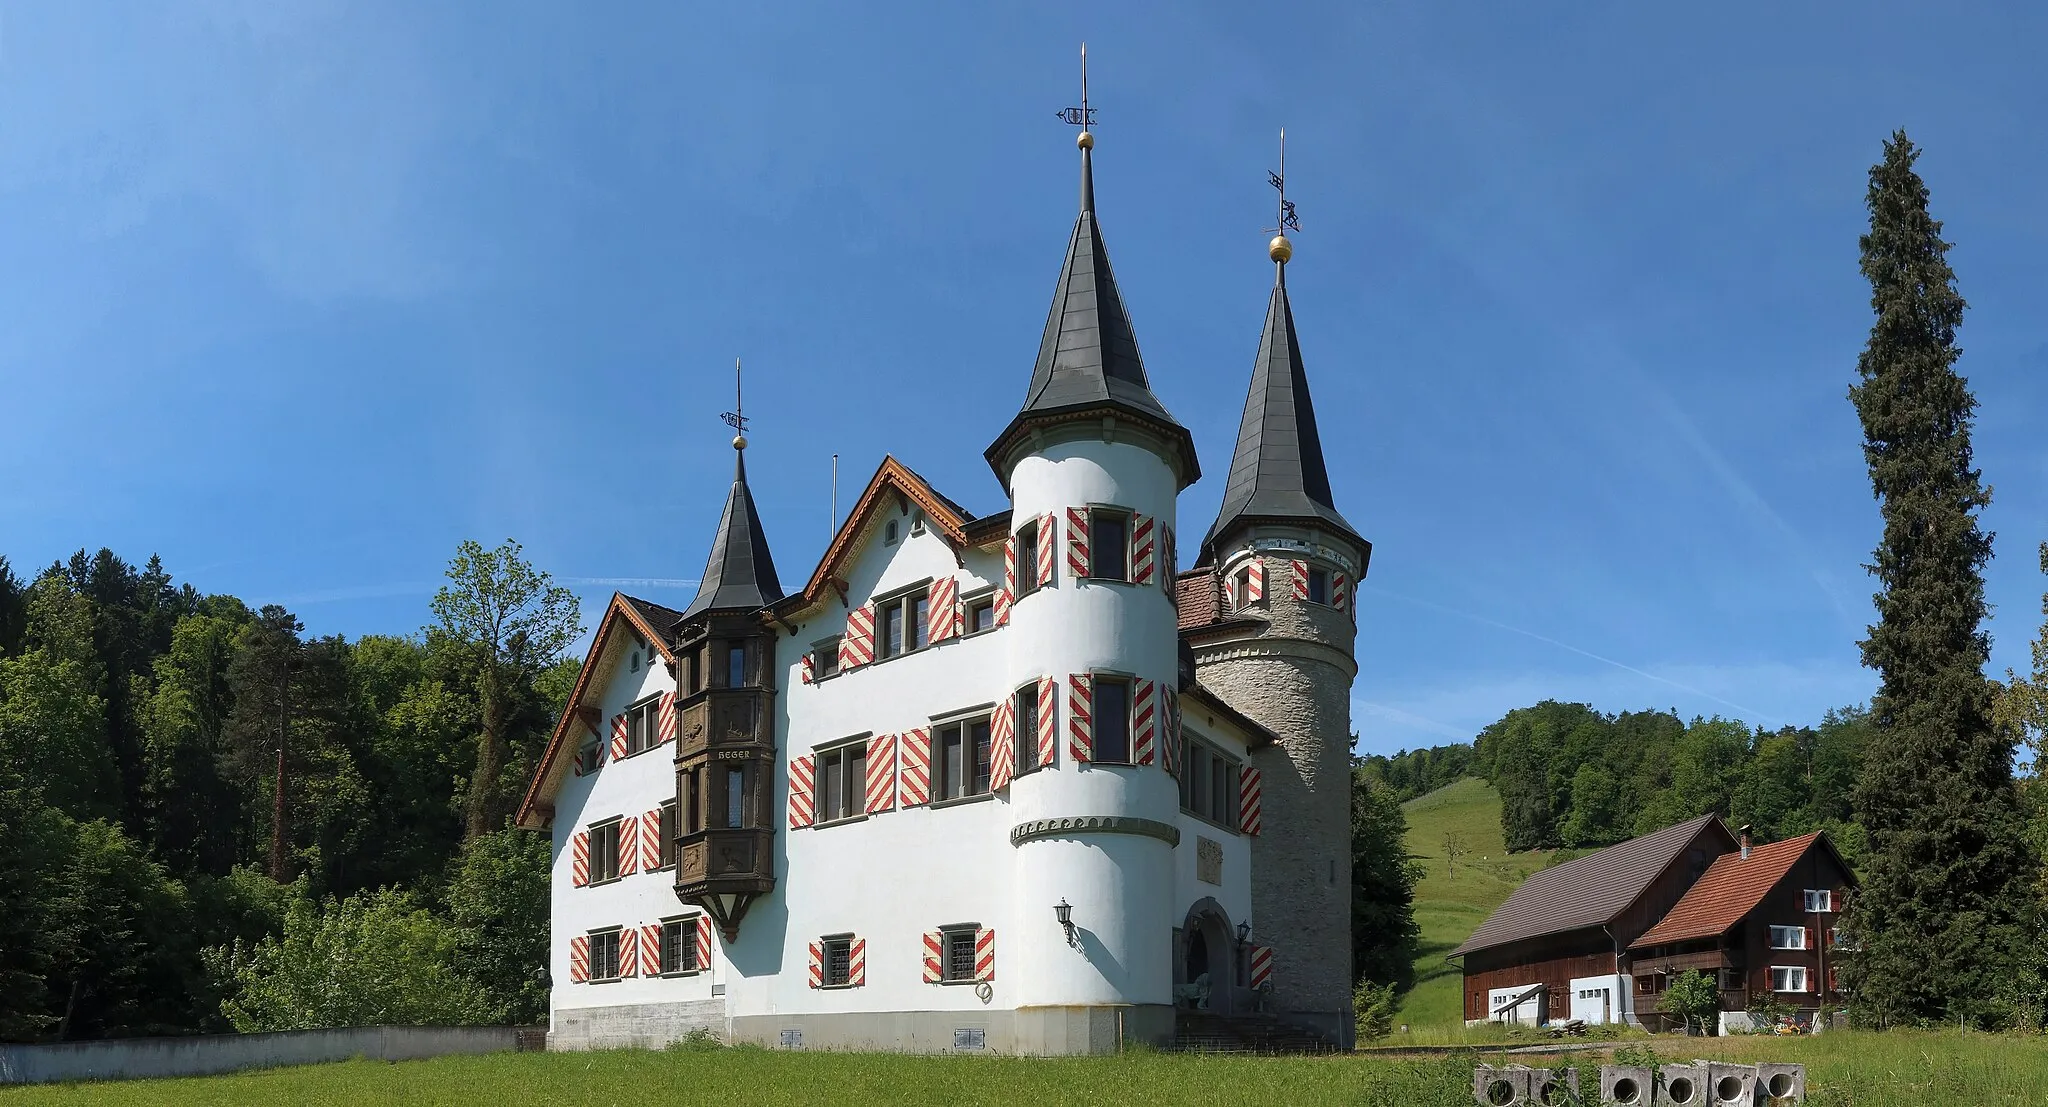 Photo showing: The castle was first mentioned in 1373. It belonged to the estate of the Barons of Enne, who from 1315 to 1416 resided at Grimmenstein Castle, which is located somewhat higher up on the hillside. Another source says that the Lords of Grimmenstein were mentioned as builders in 1320. From 1418, the castle was in the hands of the city of St. Gallen. The city appointed a bailiff for the small lordship, who lived from 1429 to 1546 in the Vorburg bought by the city hospital. From 1546 the manorial residence was used by St. Gallen and Graubünden patricians. The Vorburg was either refurbished or new built in 1602. In this connection a Prince Reuss is mentioned. A Paul Valär from Fideris is also mentioned as an owner. He died in 1684. From 1877 to 1918 the property belonged to a Johann Schelling. The owner in the 80s was the Weissenberger family. At that time there was a café and a bakery in the basement. Next to the castle there are two inhabited farmhouses of a former estate. People say, there are seven rooms, each with its own bathroom, a large shared bath, a large kitchen like of a restaurant and an elevator from the basement to the top floor. A surrounding wall and a park was never completed. The castle stands in the open meadow. The castle is 30 m higher than the connecting road between Rheineck and St. Margrethen where there is a junction of a narrow road upwards.